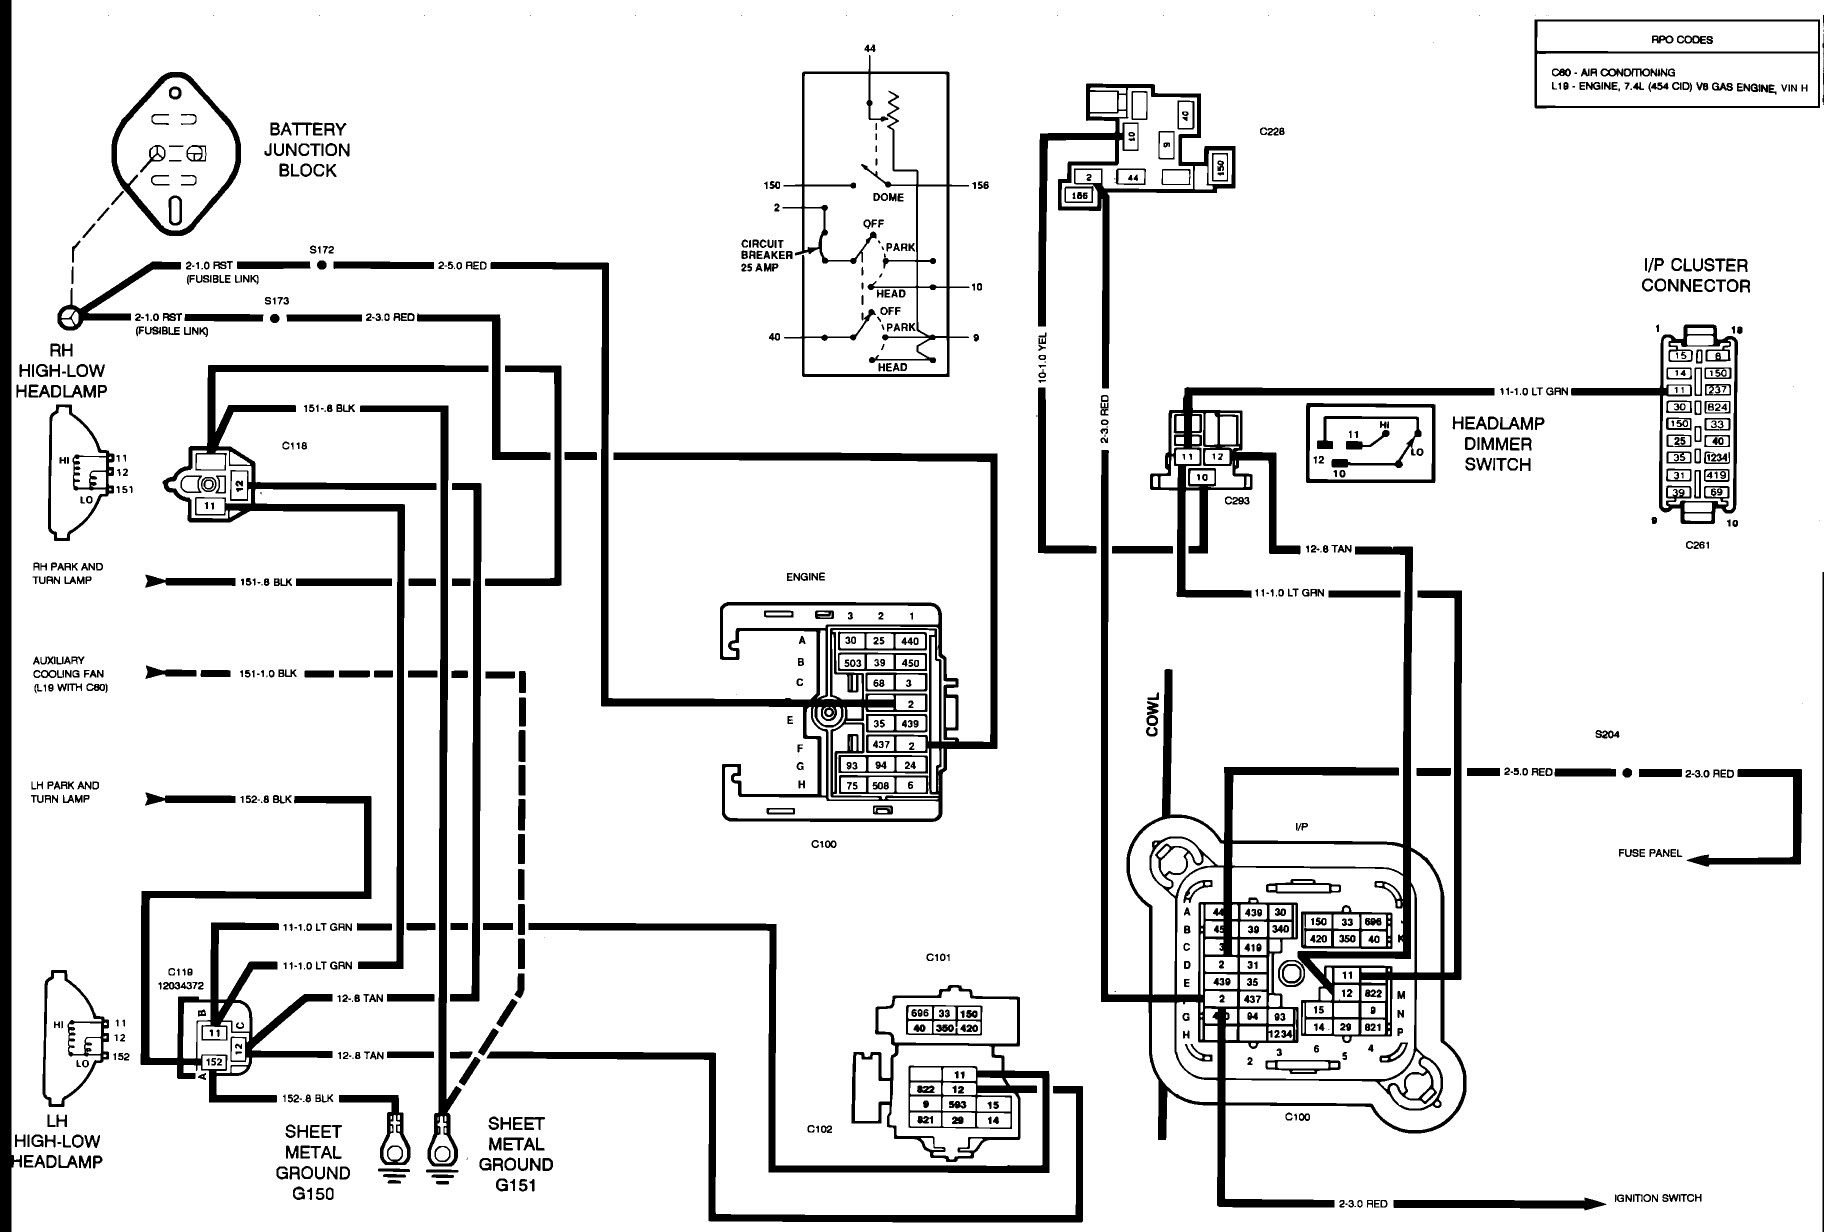 Engine Wiring Diagrams Junction Box Wiring Diagram Of Engine Wiring Diagrams